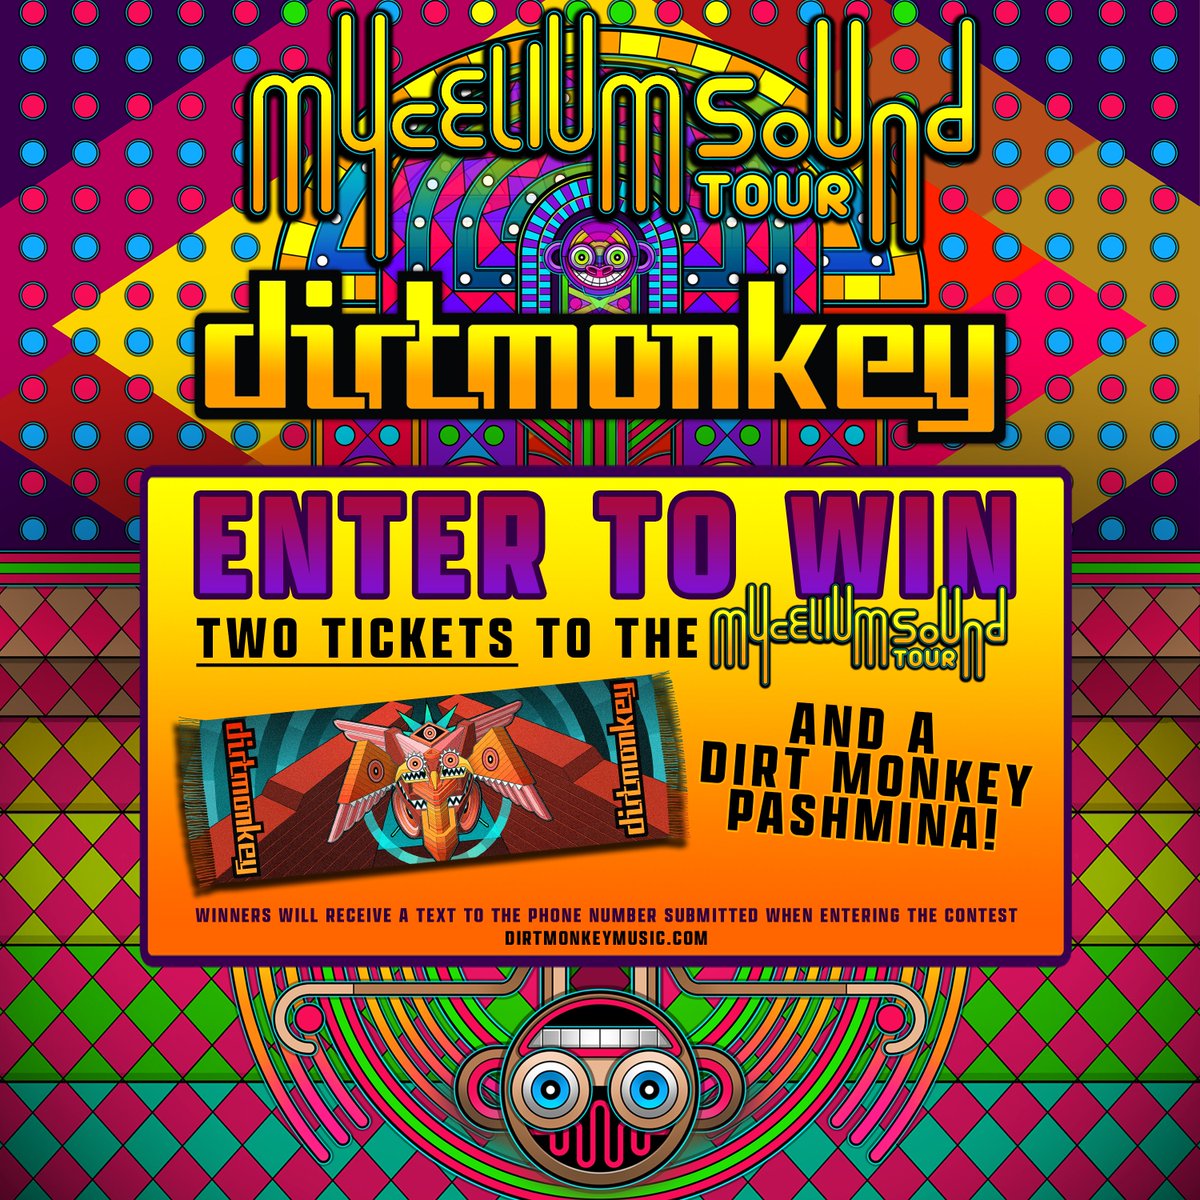 Enter to Win (2) Tix to the Mycelium Sound Tour and a Dirt Monkey Pashmina 🍌🐒 Tag a Friend in the comments and complete the form app.hive.co/l/3uunbh to be entered to win! 🎉 @CollectivPrsnts @dirtmonkeymusic